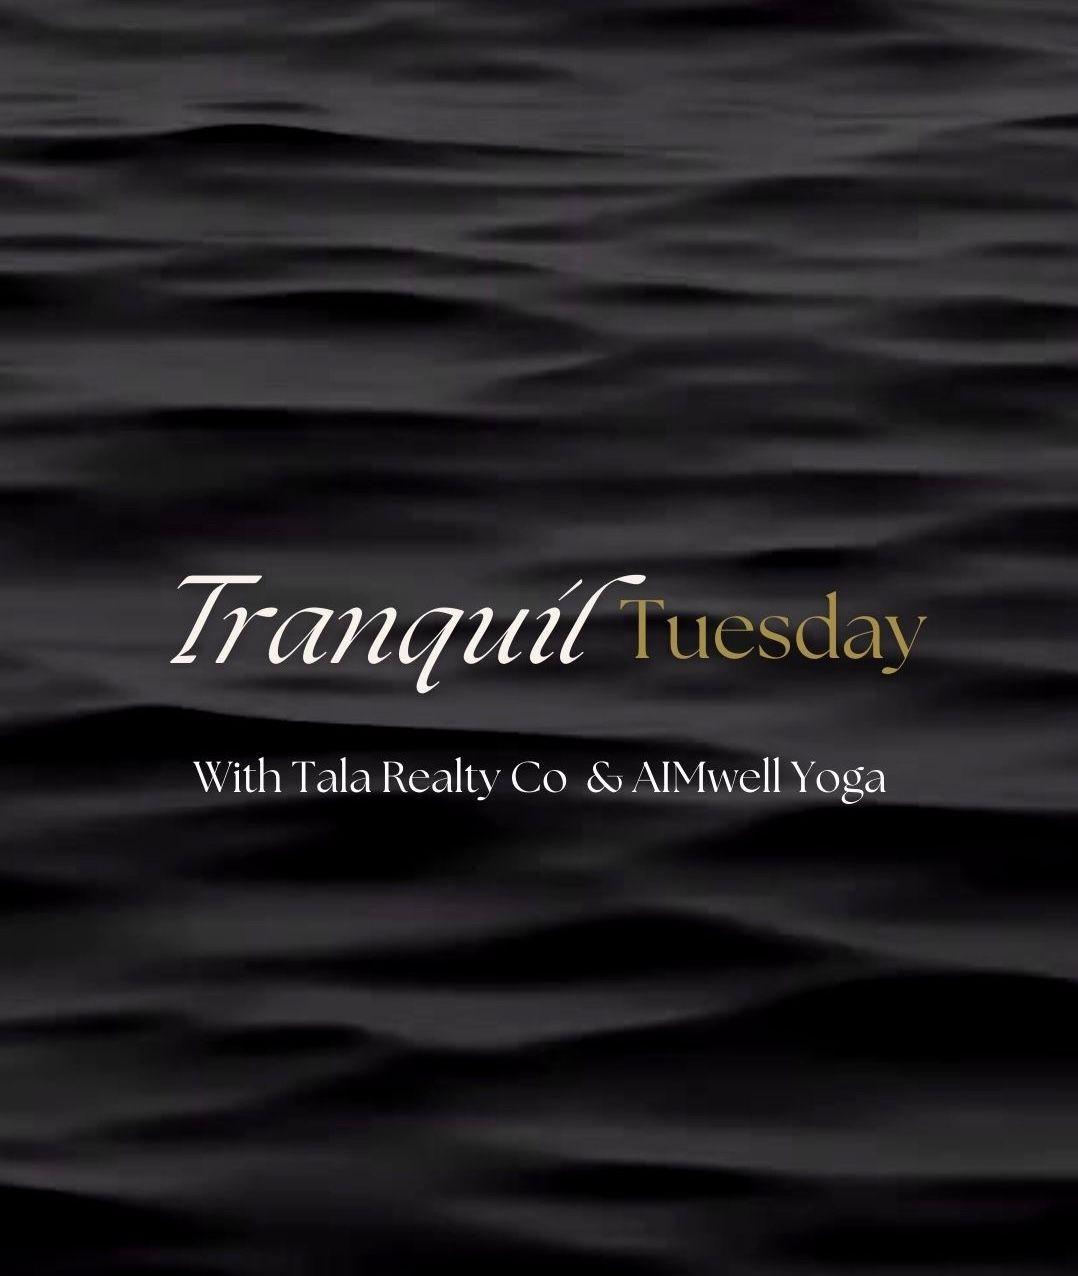 Tranquil Tuesdays